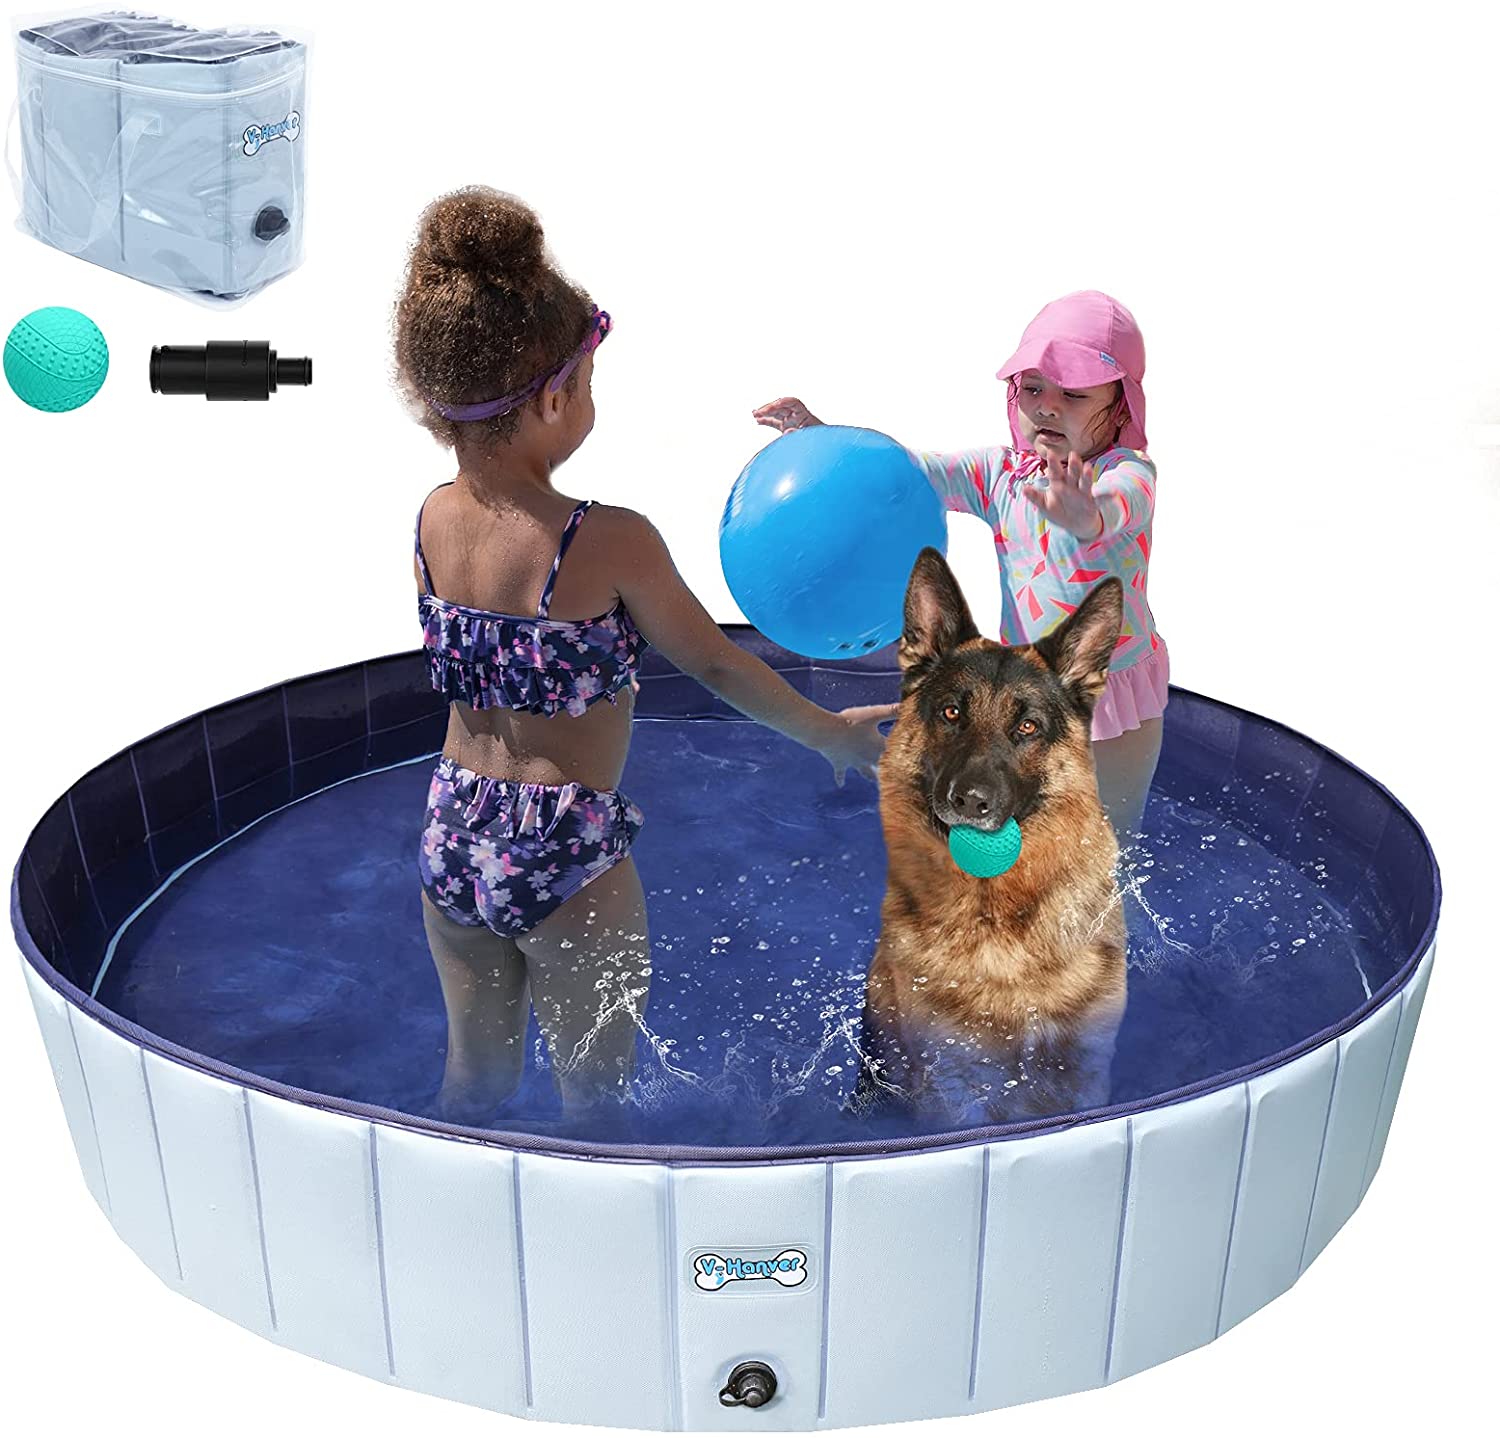 V HANVER Foldable Dog Pool for Small Dogs